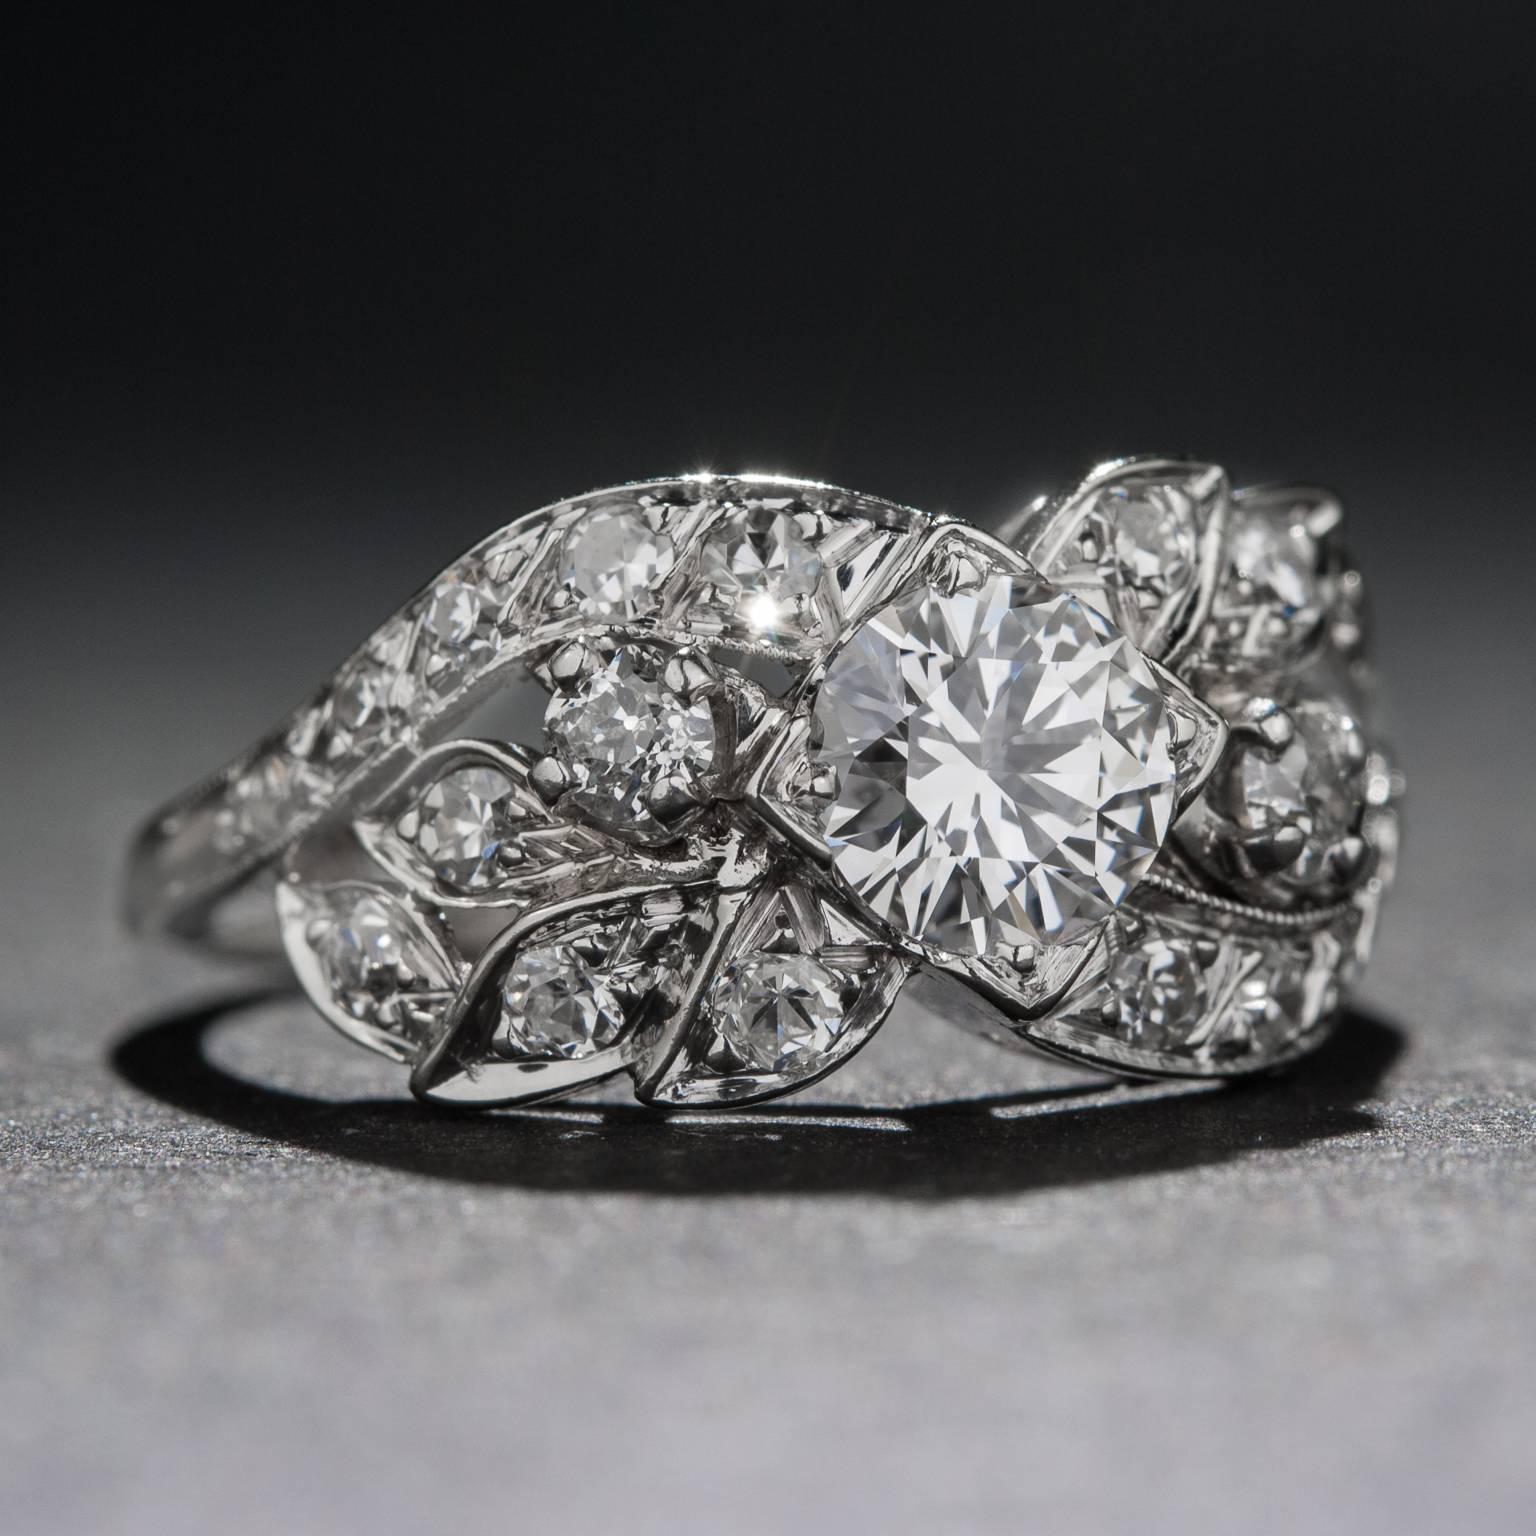 An extraordinarily beautiful diamond ring hand-crafted in the Art Deco design era. This piece features a .50 carat center diamond (G-H color, VS clarity) as well as 20 smaller accent diamonds weighing a total of .50 carats (G-I color, VS=SI